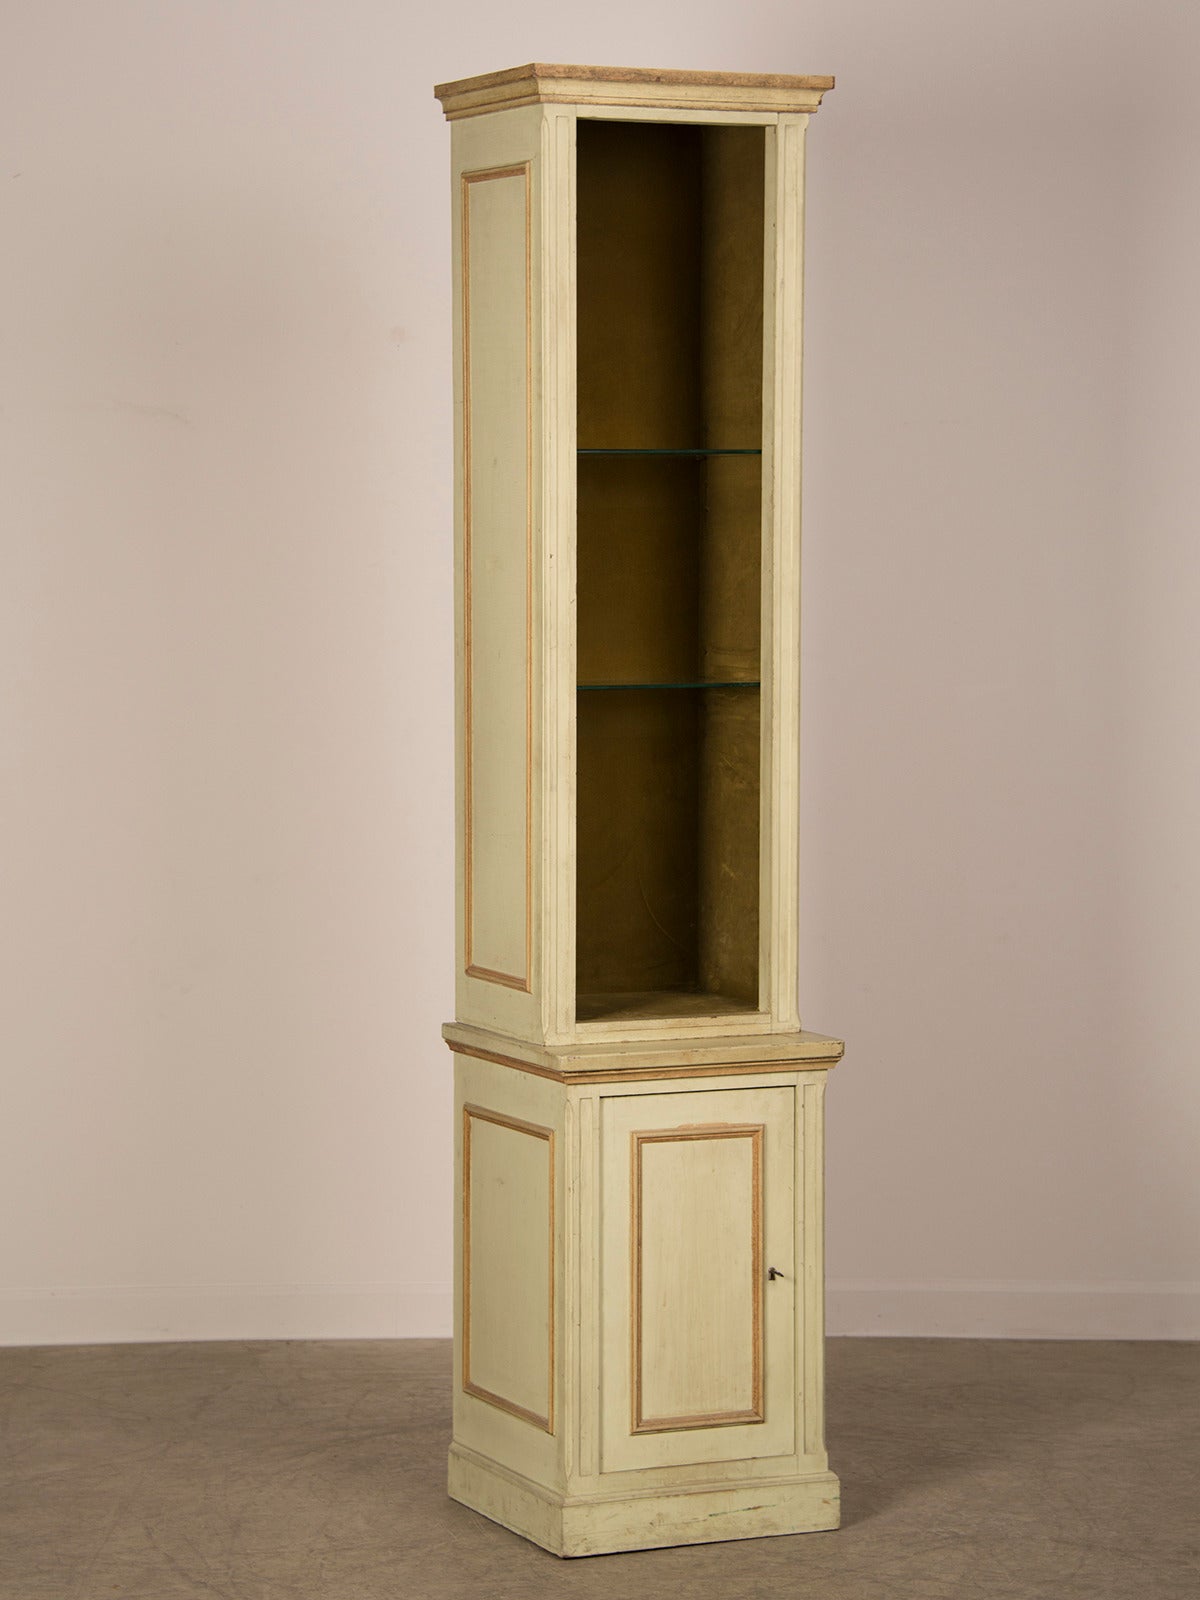 A tall and slender Georgian style cabinet with moulded detail and the original painted finish from England c. 1920 with an open display upper section and a cabinet below. The detailing and colour is reminiscent of the drawing room at Highclere